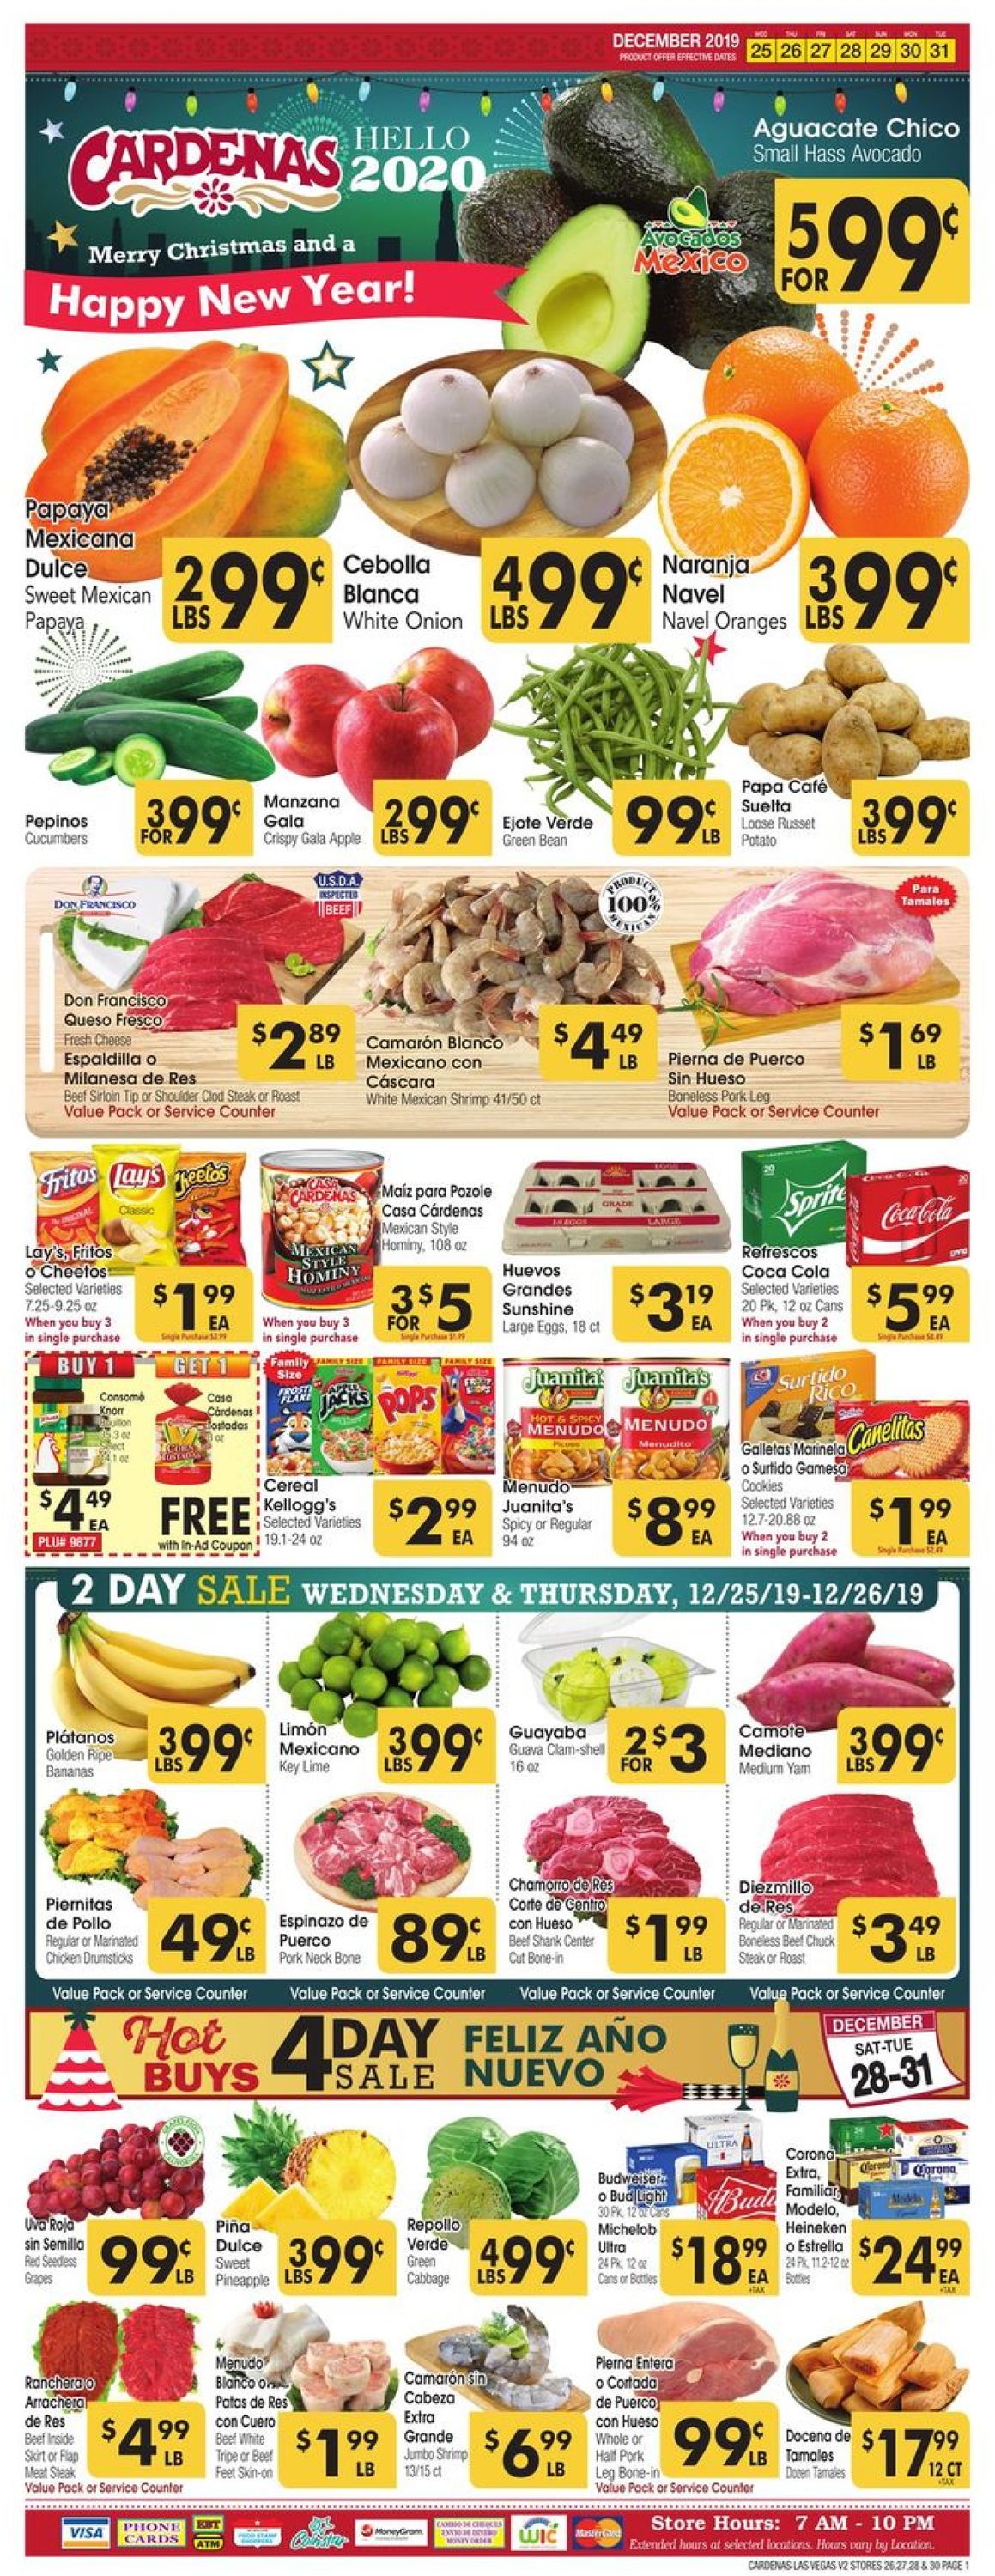 Catalogue Cardenas - New Year's Ad 2019/2020 from 12/25/2019